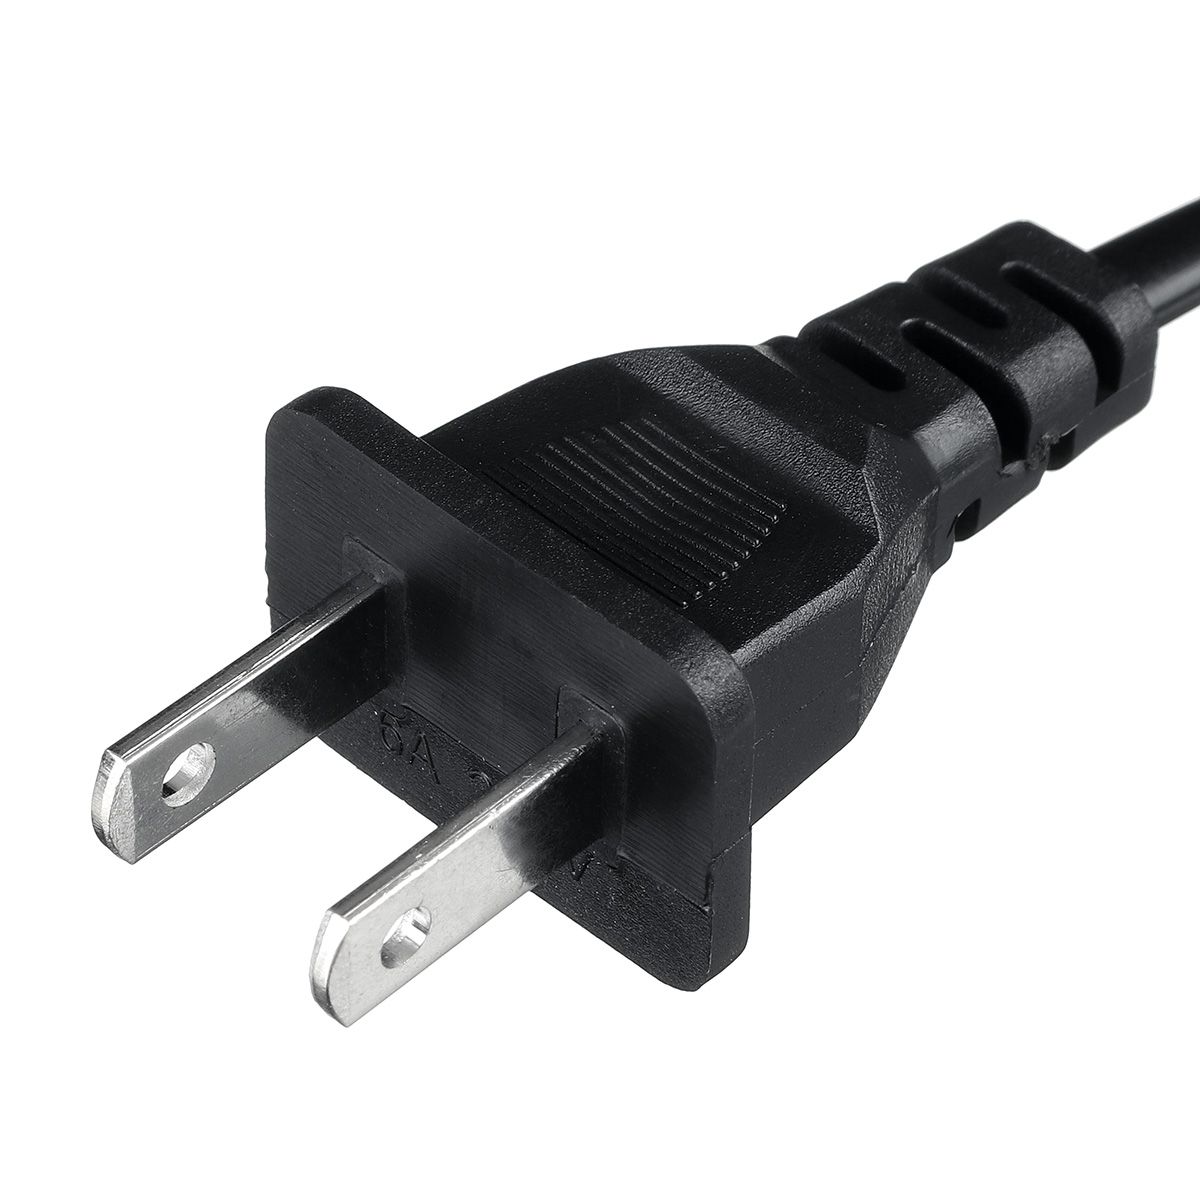 100-240V-6A-Power-Cord-Adapter-50--60HZ-Power-Cable-Adapter-Laptop-Charger-1790400-6